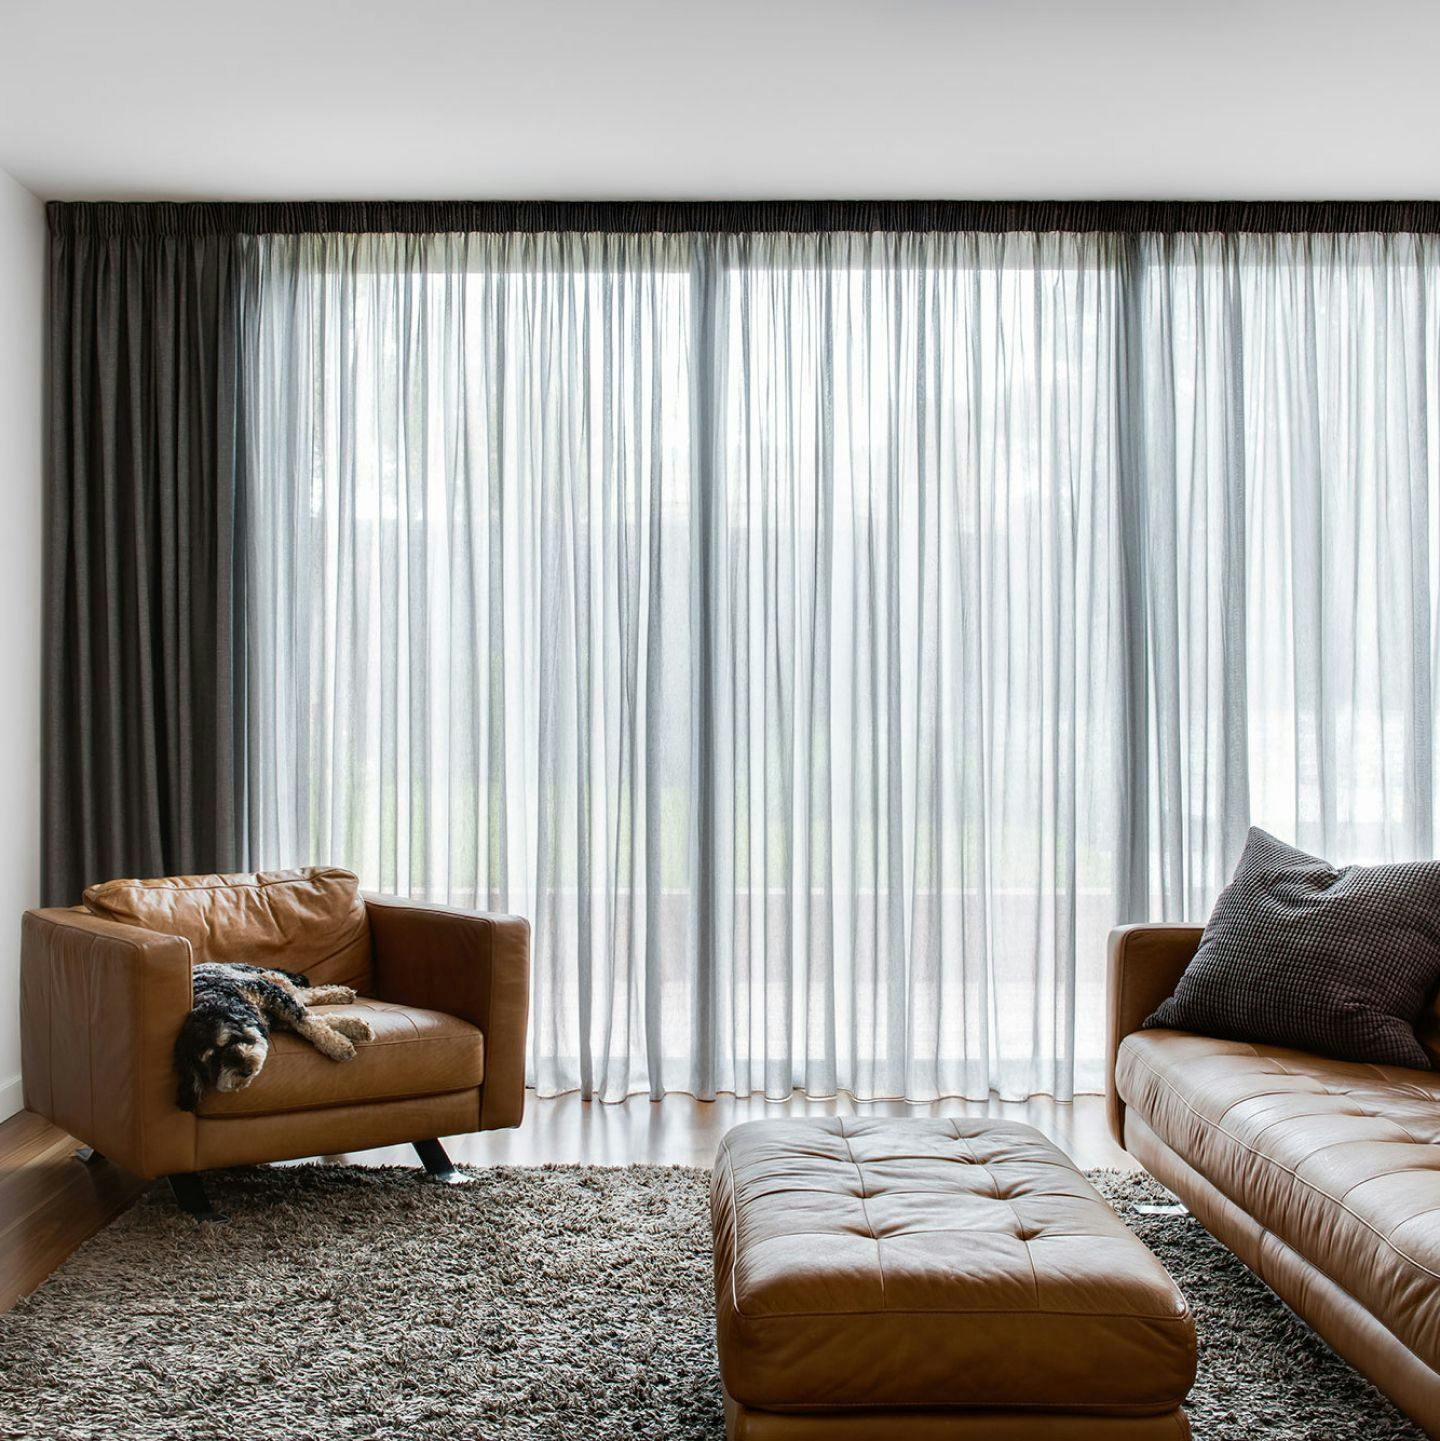 How to choose the right curtain heading